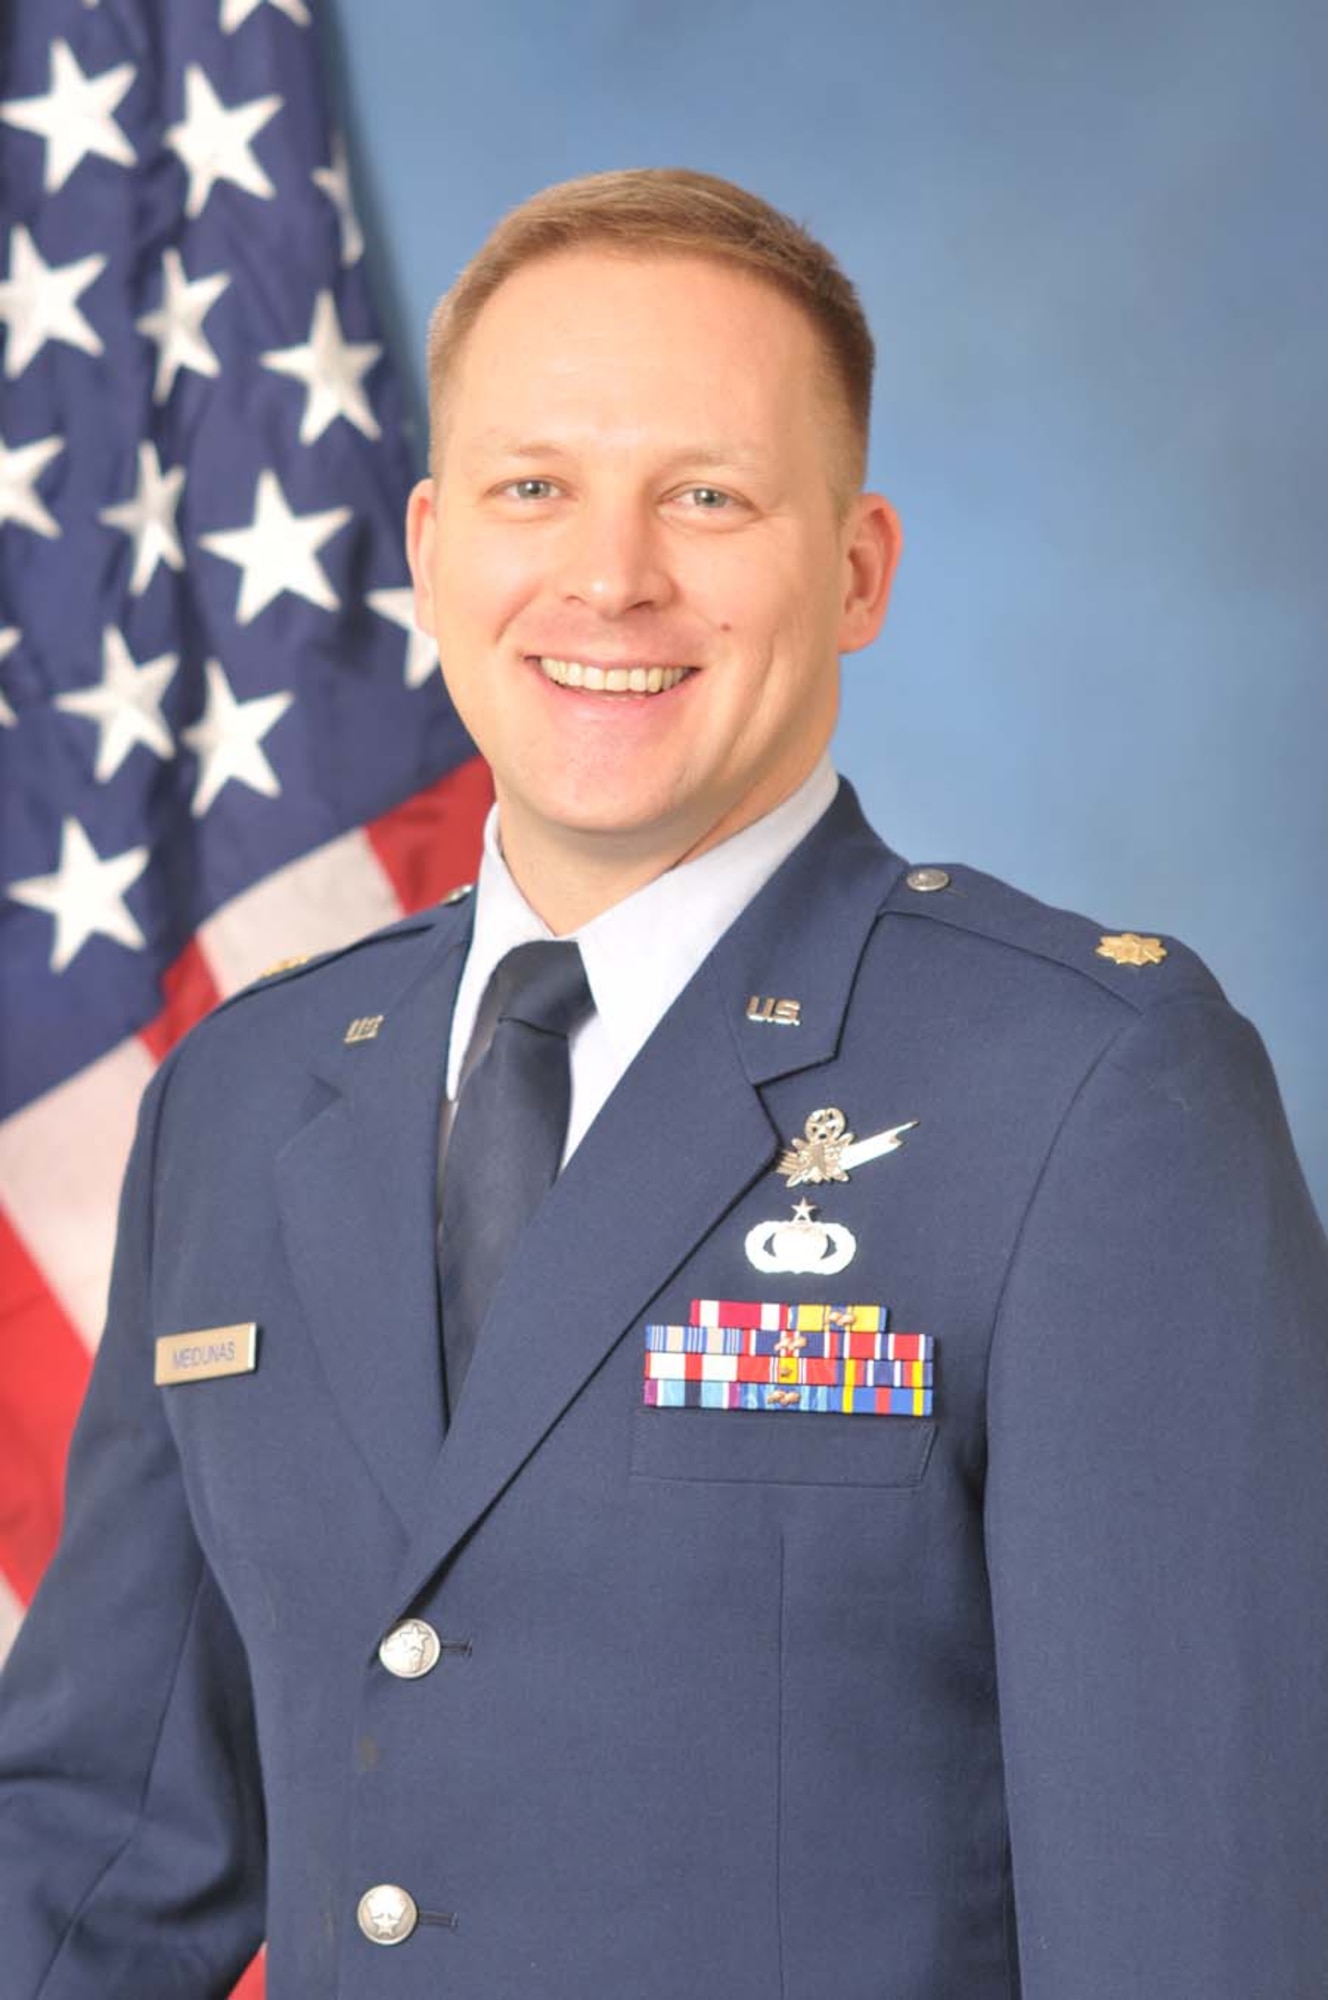 Maj. Eduardo Meidunas from the Headquarters Air Force Operational Test and Evaluation Center's Commanders Action Group at Kirtland AFB, N.M., is the 2009 AFOTEC Field Grade Officer of the Year.